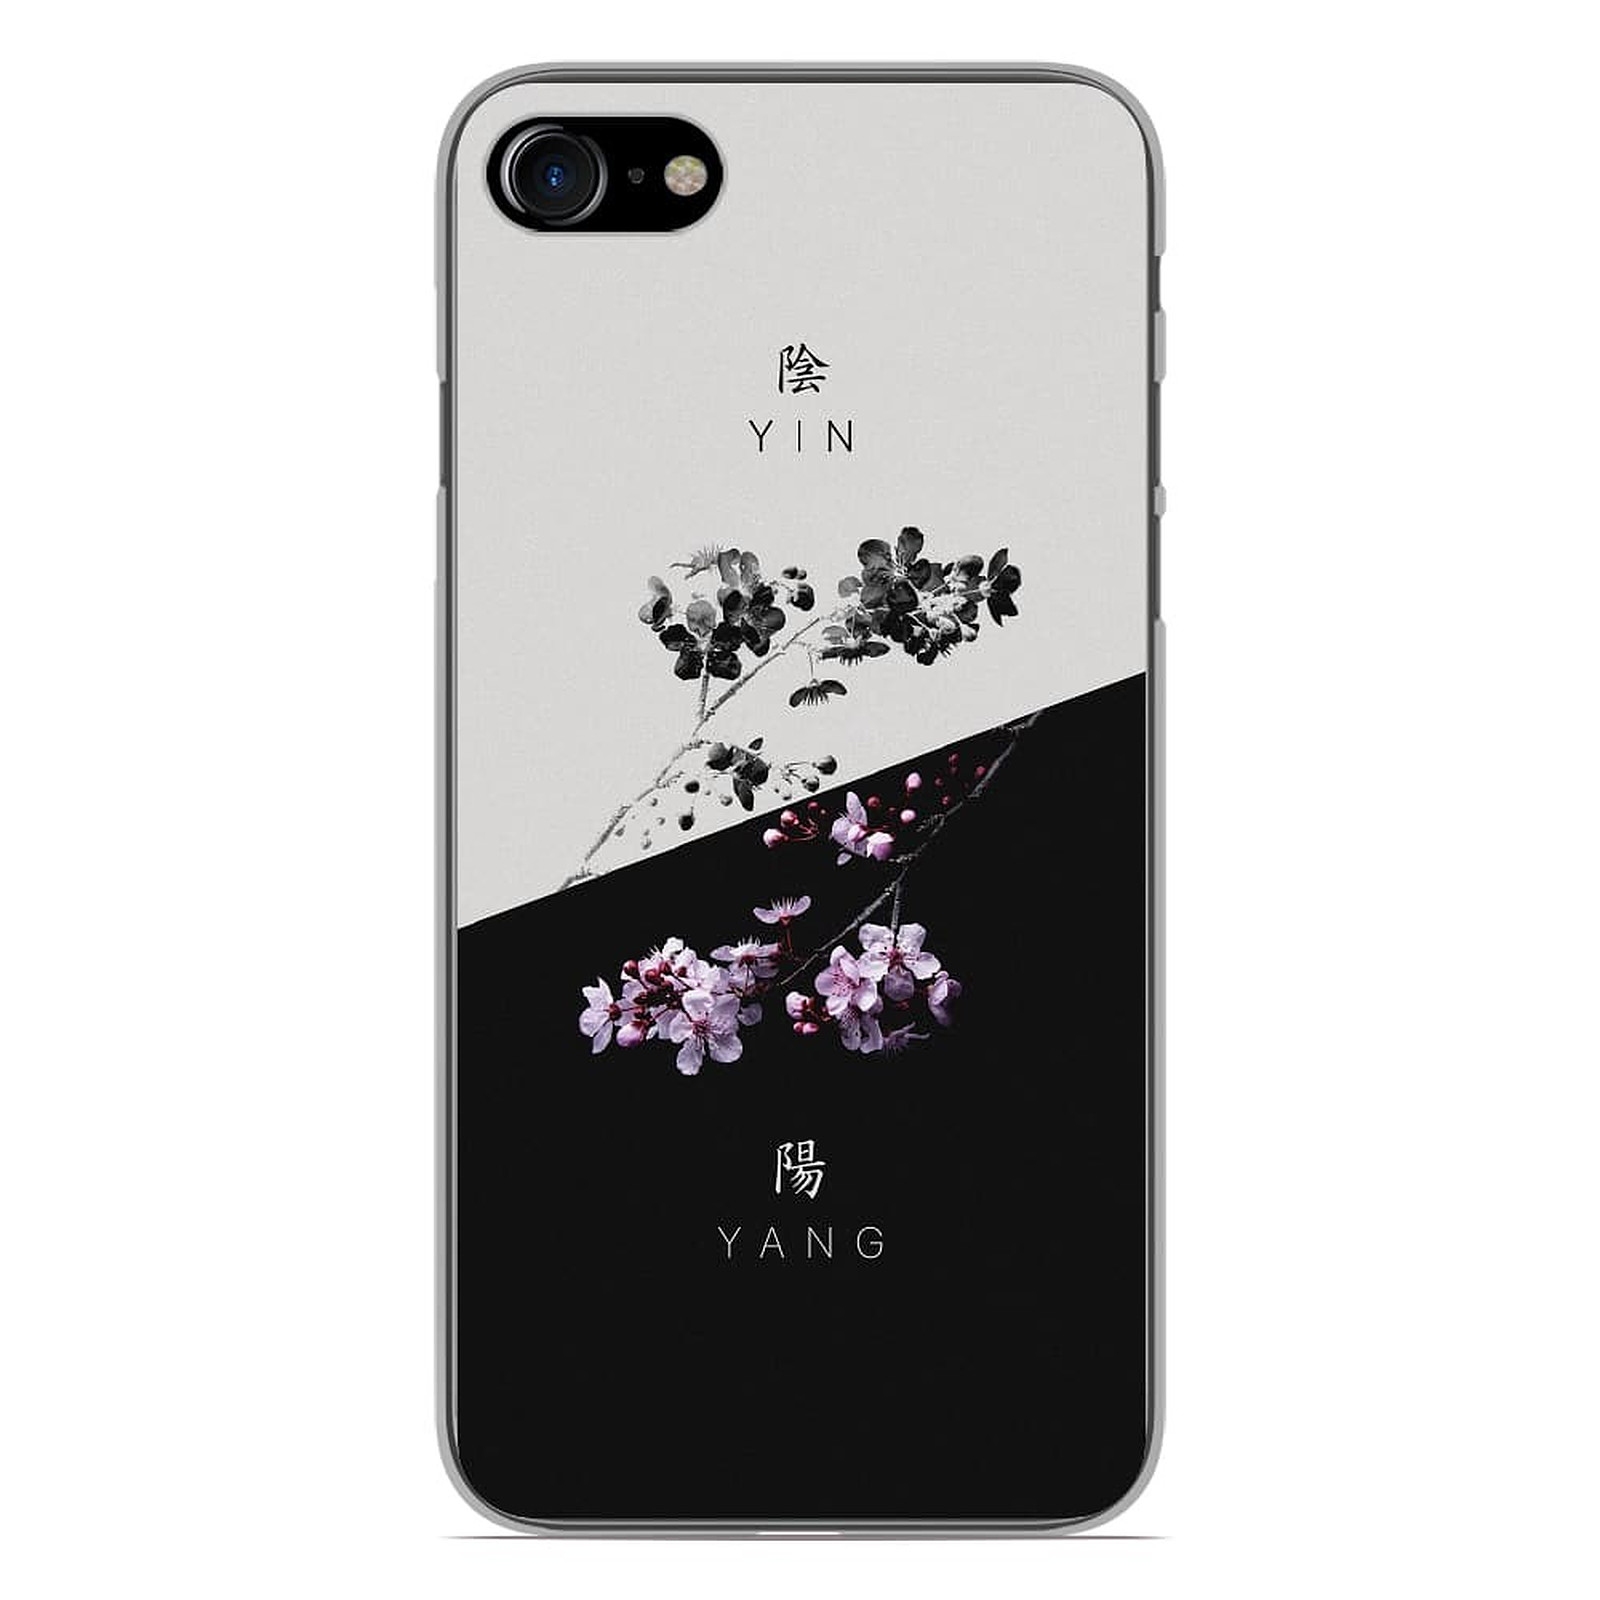 1001 Coques Coque silicone gel Apple iPhone 8 motif Yin et Yang - Coque telephone 1001Coques